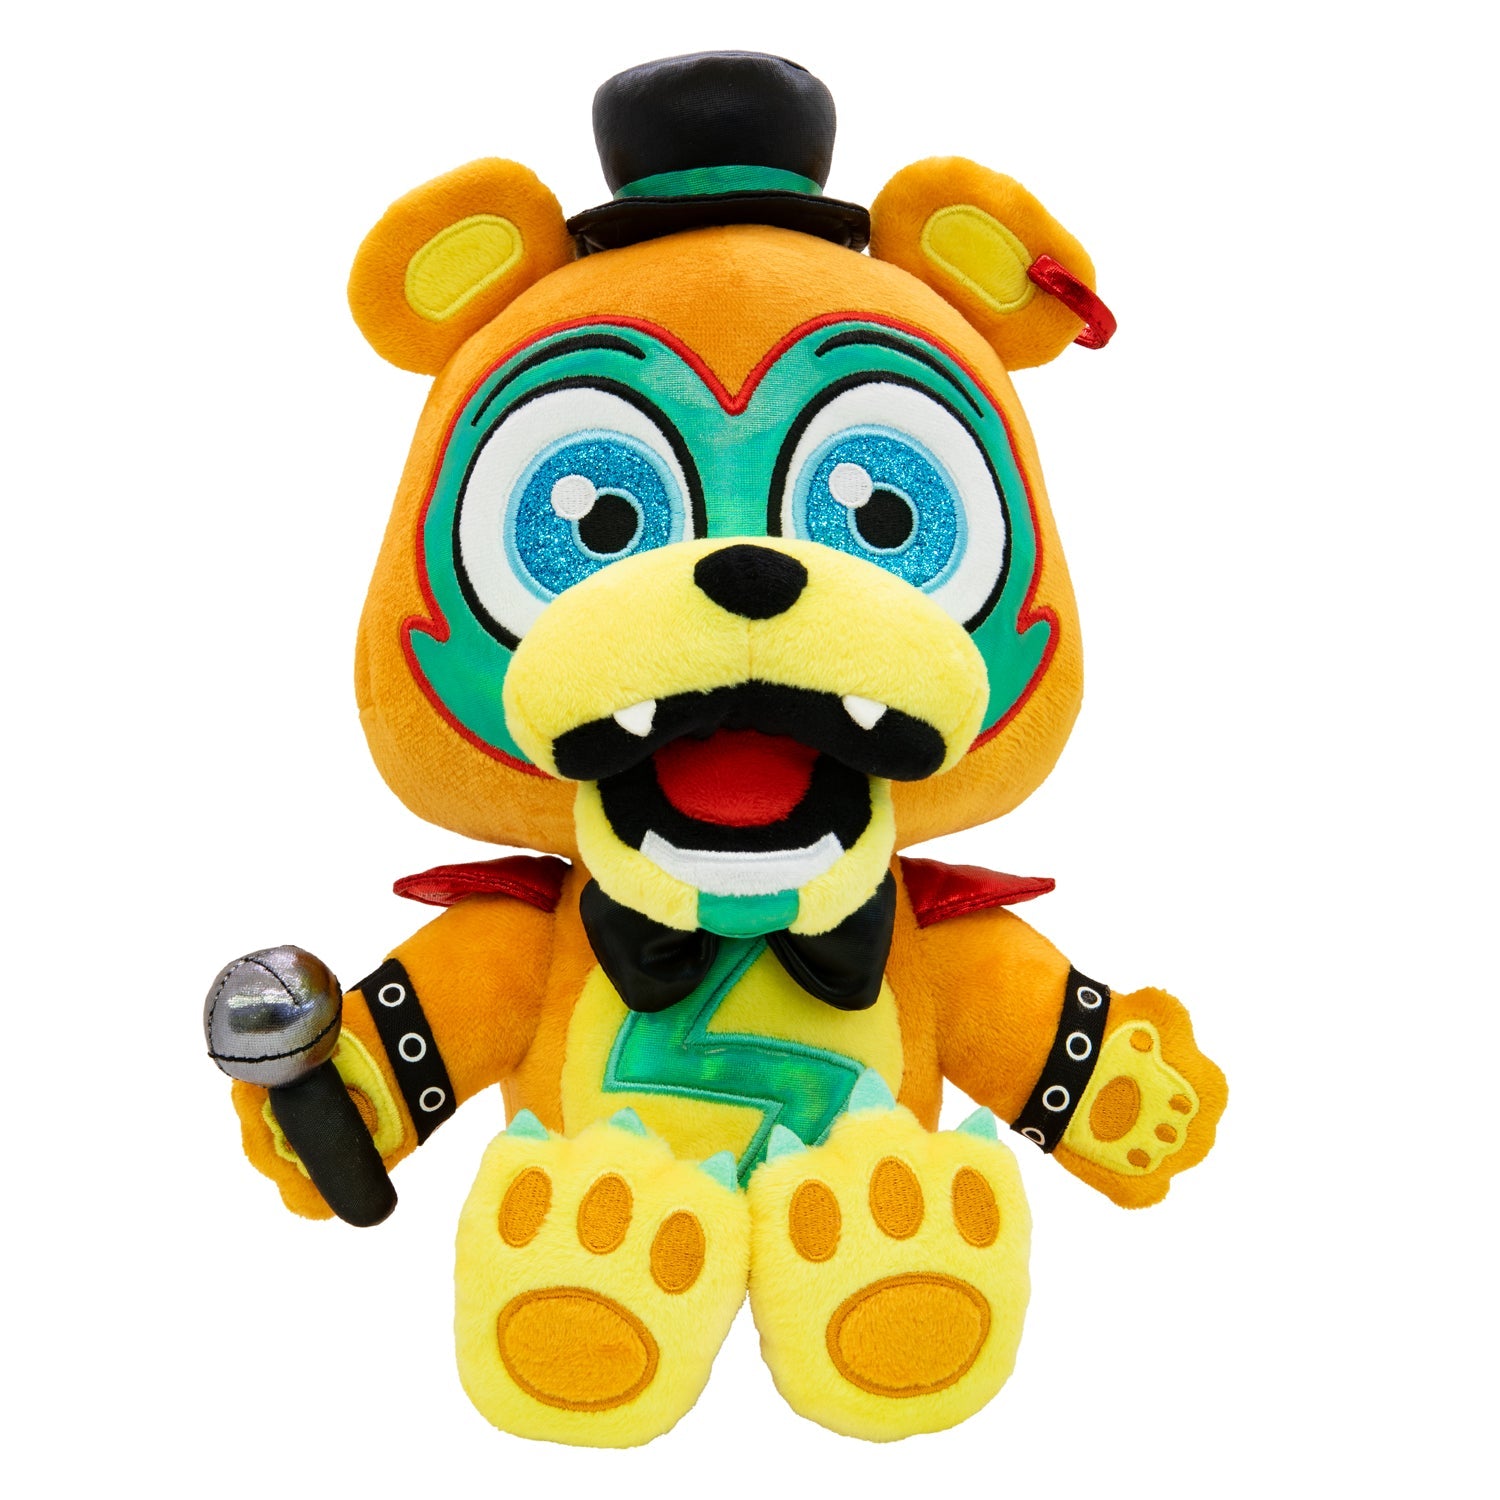 Five Nights at Freddys Party Supplies -  UK